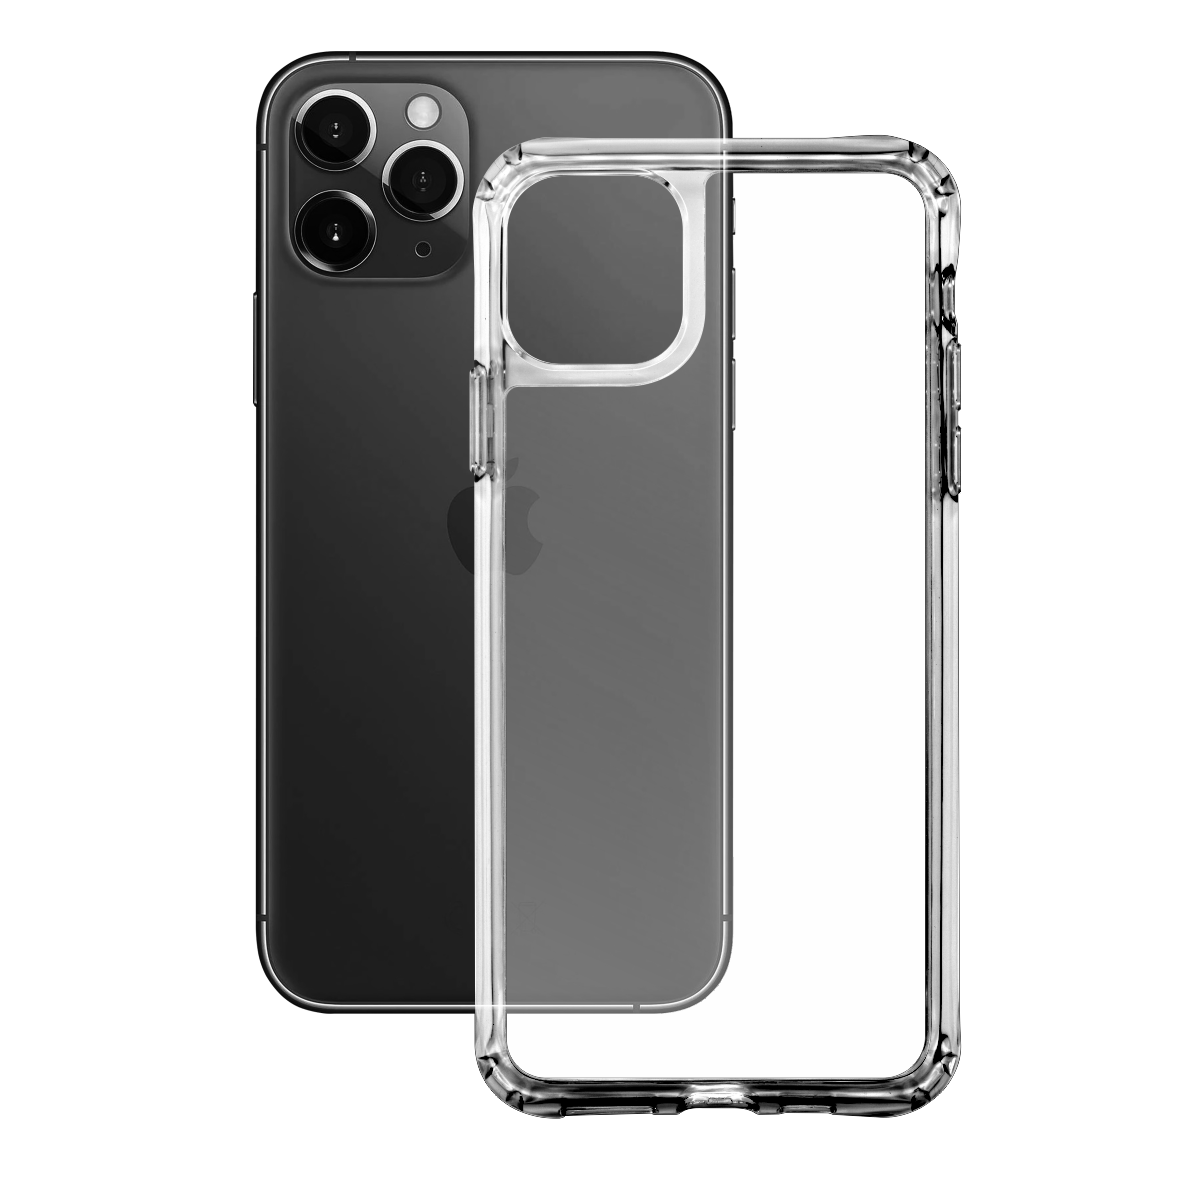 iPhone 11 Pro MAX EZY See-Through Hybrid Case, Liquid Case, Clear Case, Crystal Clear Case, Transparent Case by EasySkinz